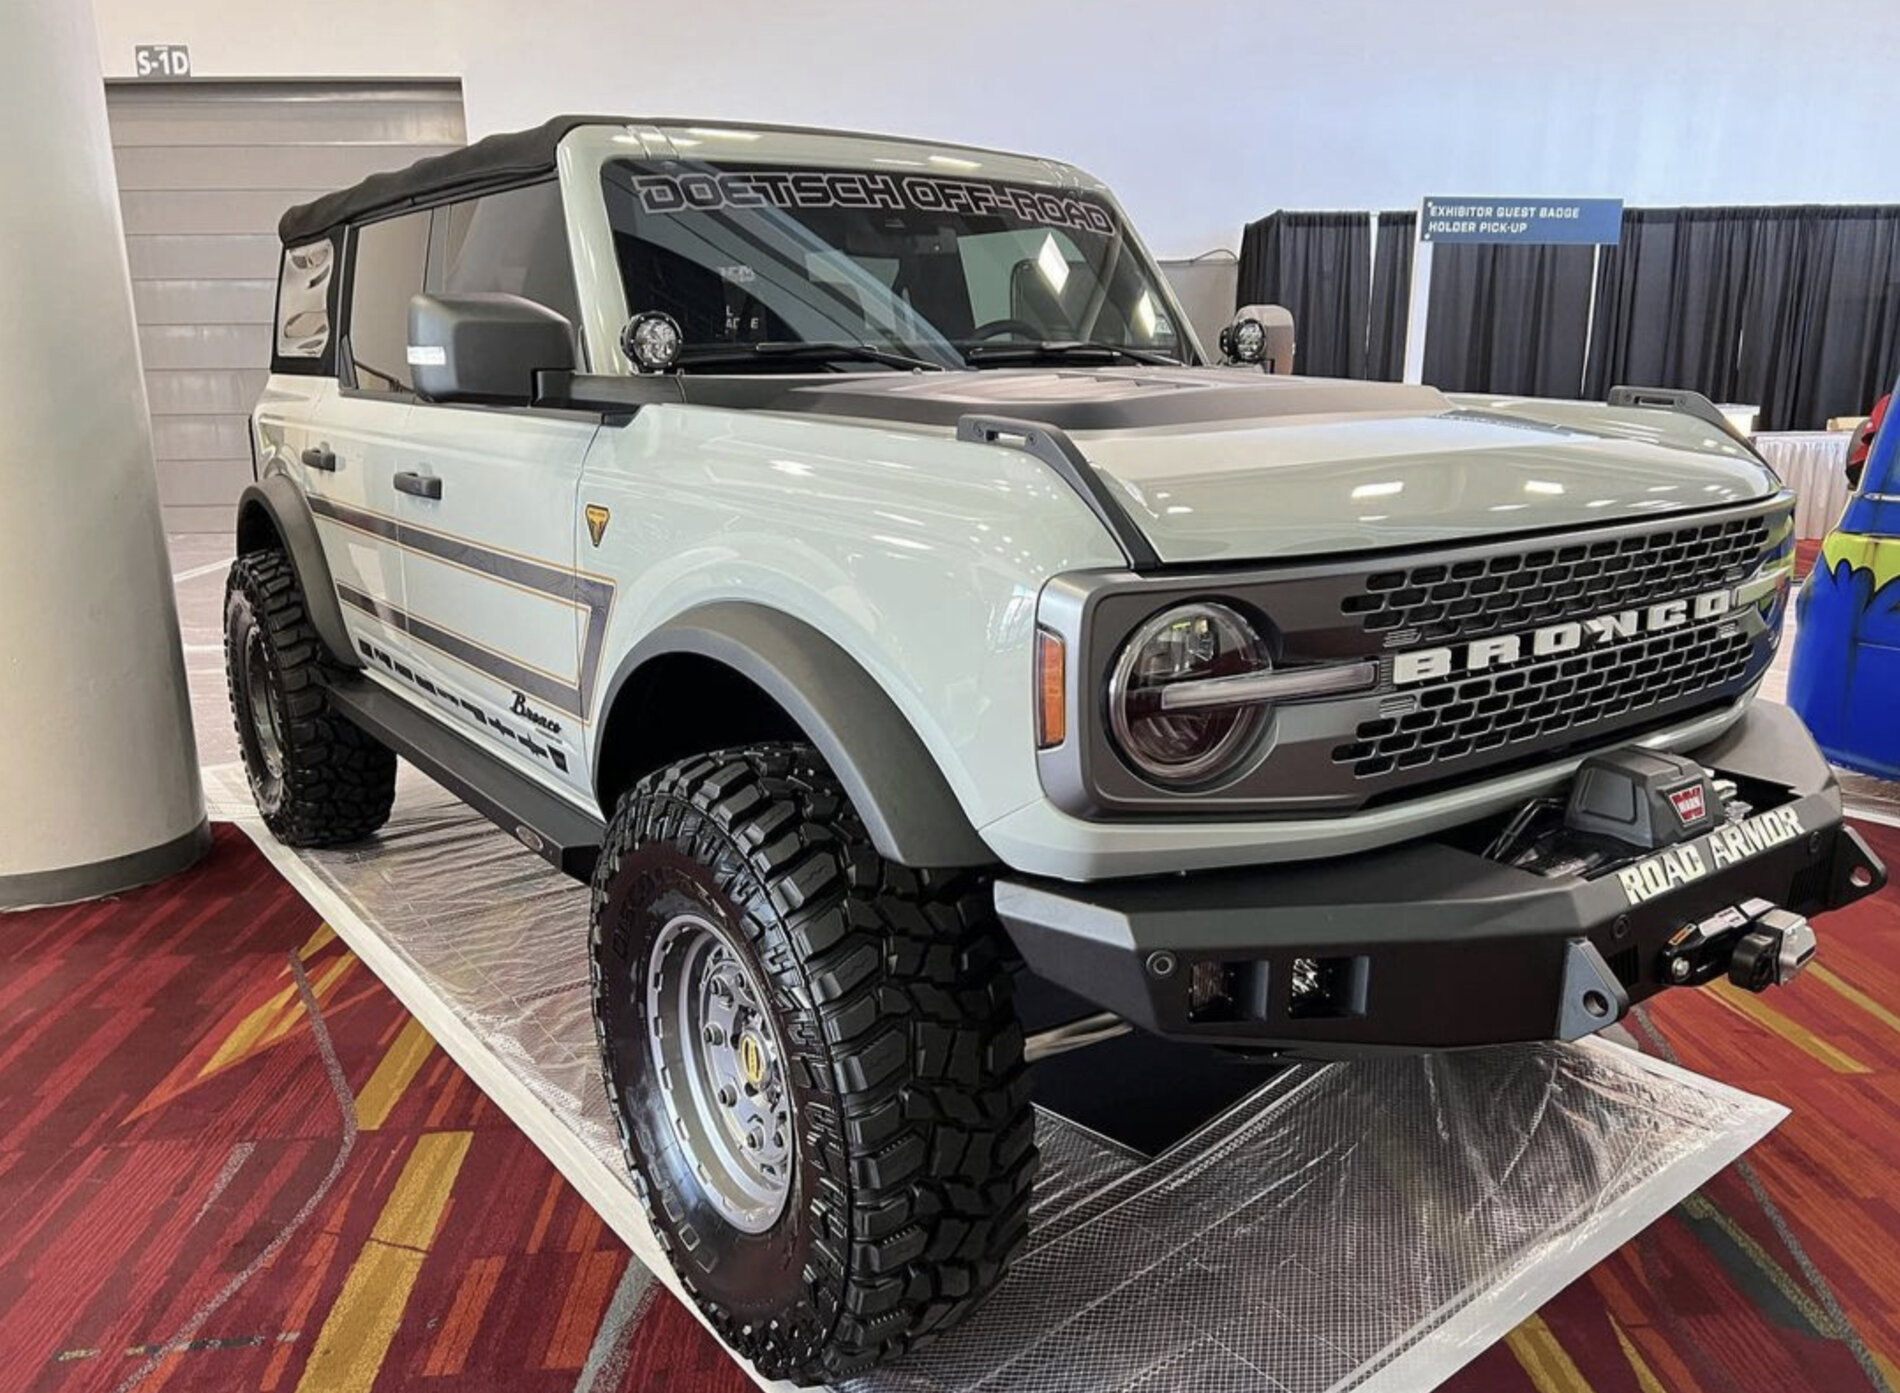 Ford Bronco Pics of (almost) all the SEMA Broncos In One Thread 281B81E4-976D-42BF-A570-8F33A8F14BF2